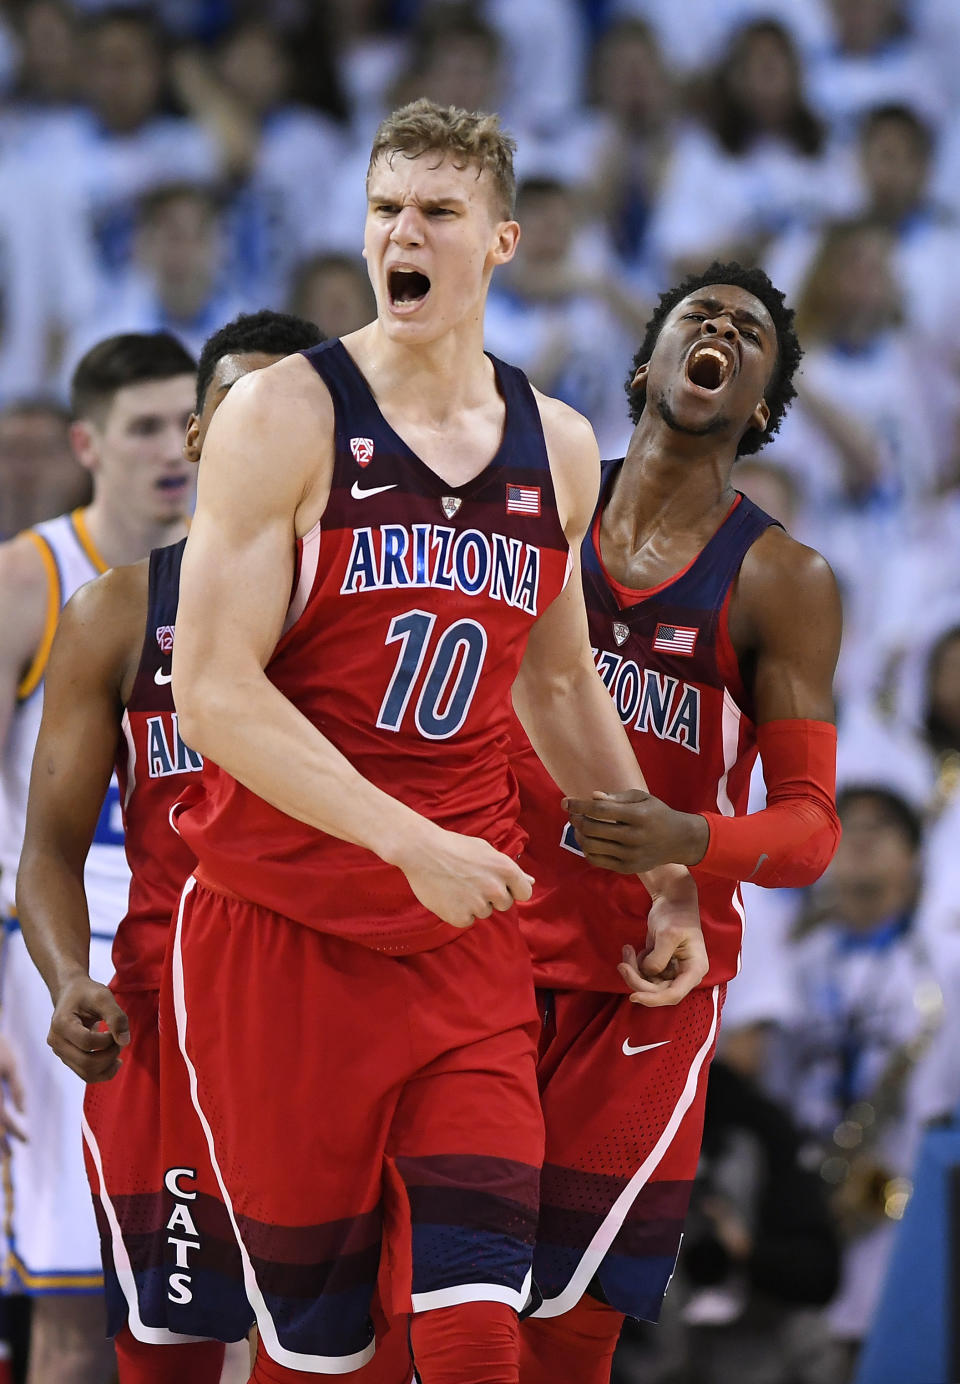 Arizona forward Lauri Markkanen, left, and guard Kobi Simmons celebrate after they scored late in the second half of an NCAA college basketball game against UCLA, Saturday, Jan. 21, 2017, in Los Angeles. Arizona won 96-85. (AP Photo/Mark J. Terrill)